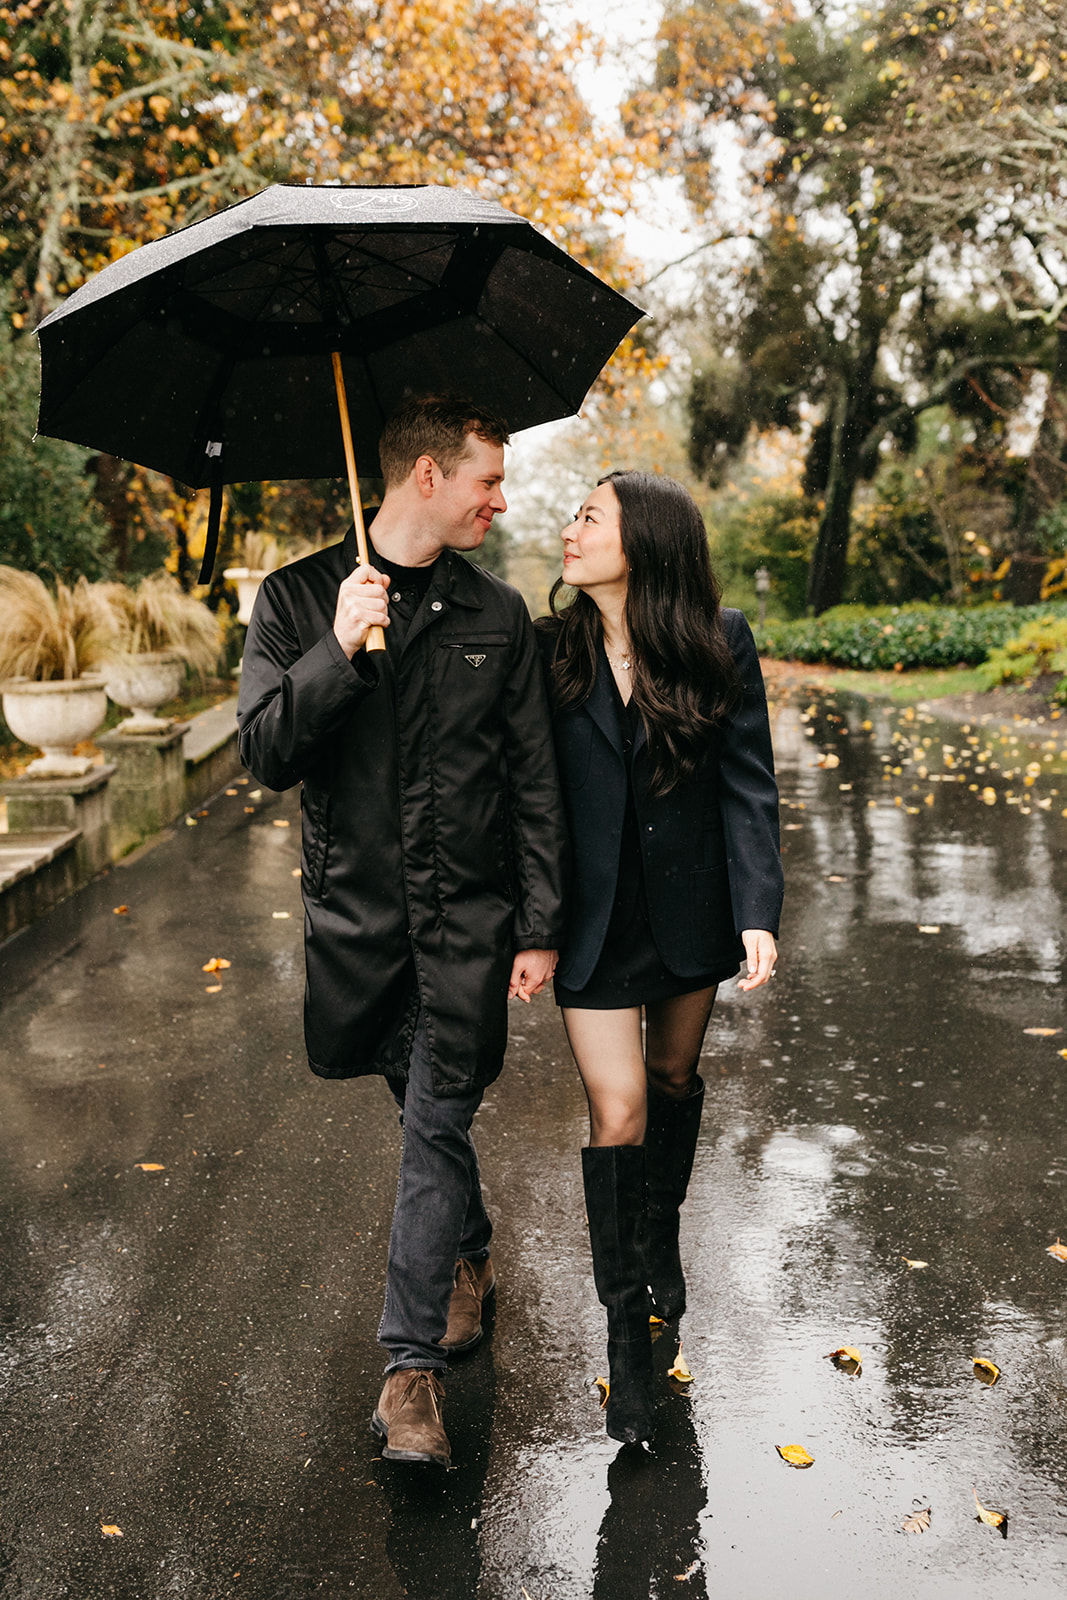 walking in rain together during engagement session